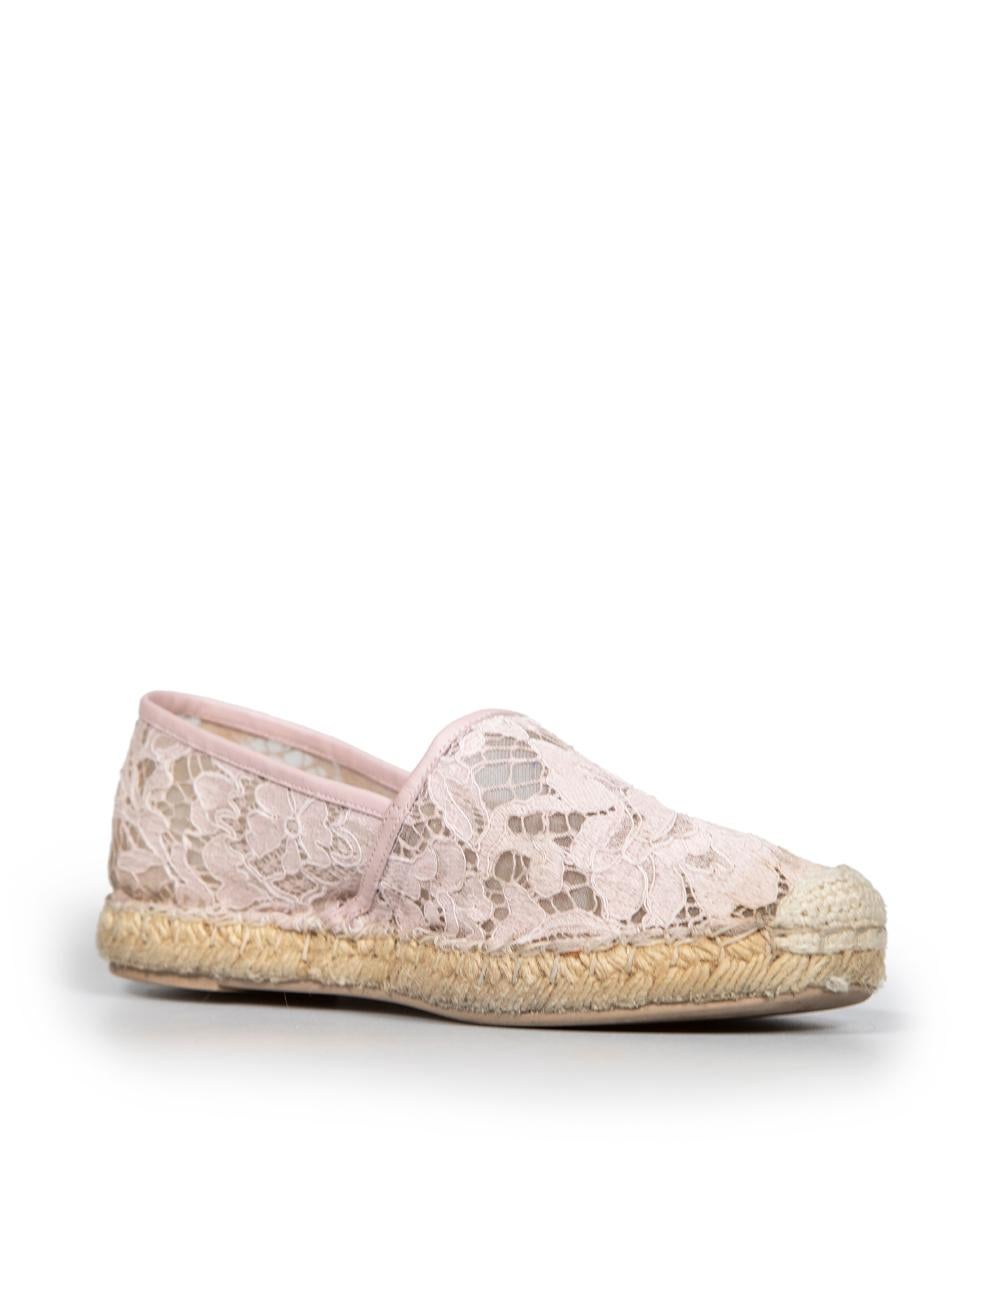 CONDITION is Good. Minor wear to shoes is evident. Light wear to overall lace where discolouration is evident especially to the front toe and rear heel on this used Valentino designer resale item.
 
 Details
 Pink
 Lace
 Espadrilles
 Flat
 Round